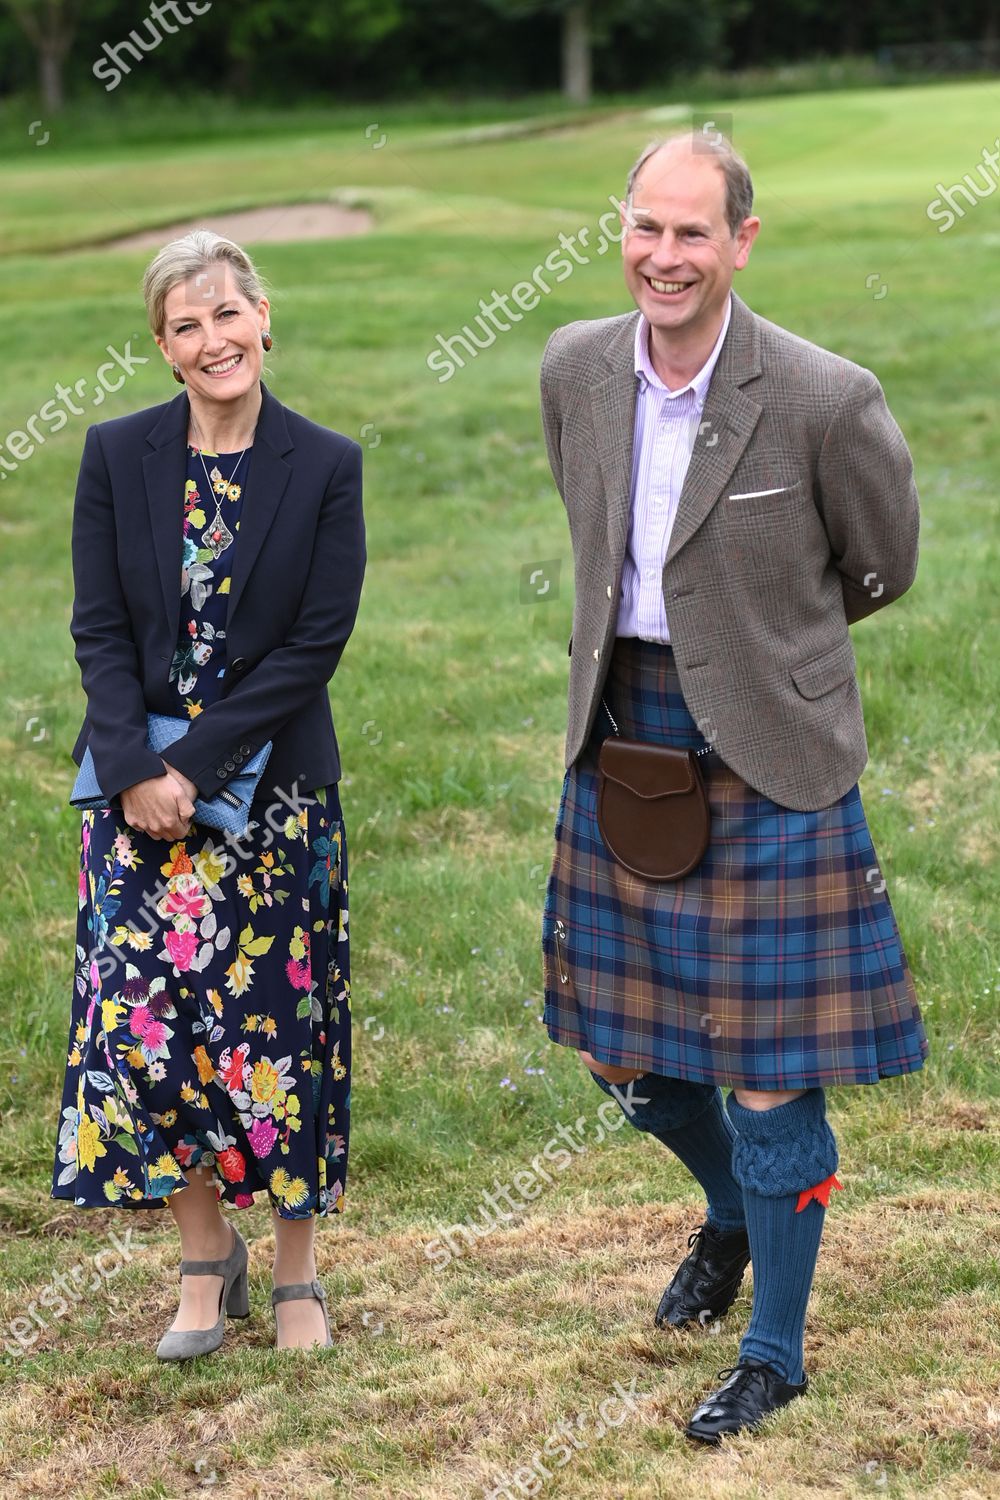 CASA REAL BRITÁNICA - Página 76 Prince-edward-and-sophie-countess-of-wessex-visit-to-forfar-golf-club-scotland-uk-shutterstock-editorial-12172307aq